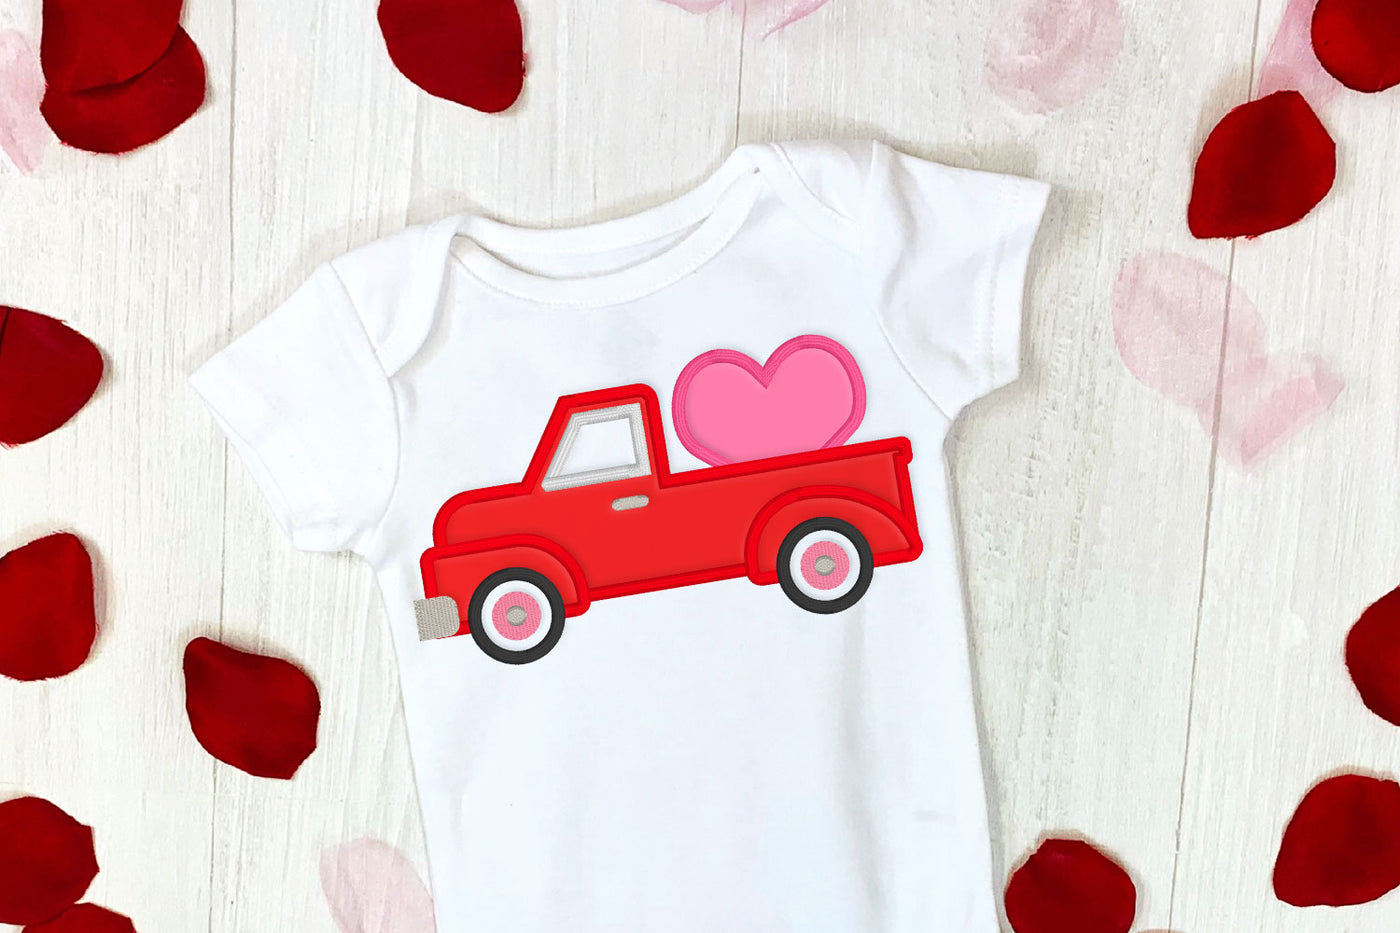 Vintage Truck with Heart Applique Embroidery File